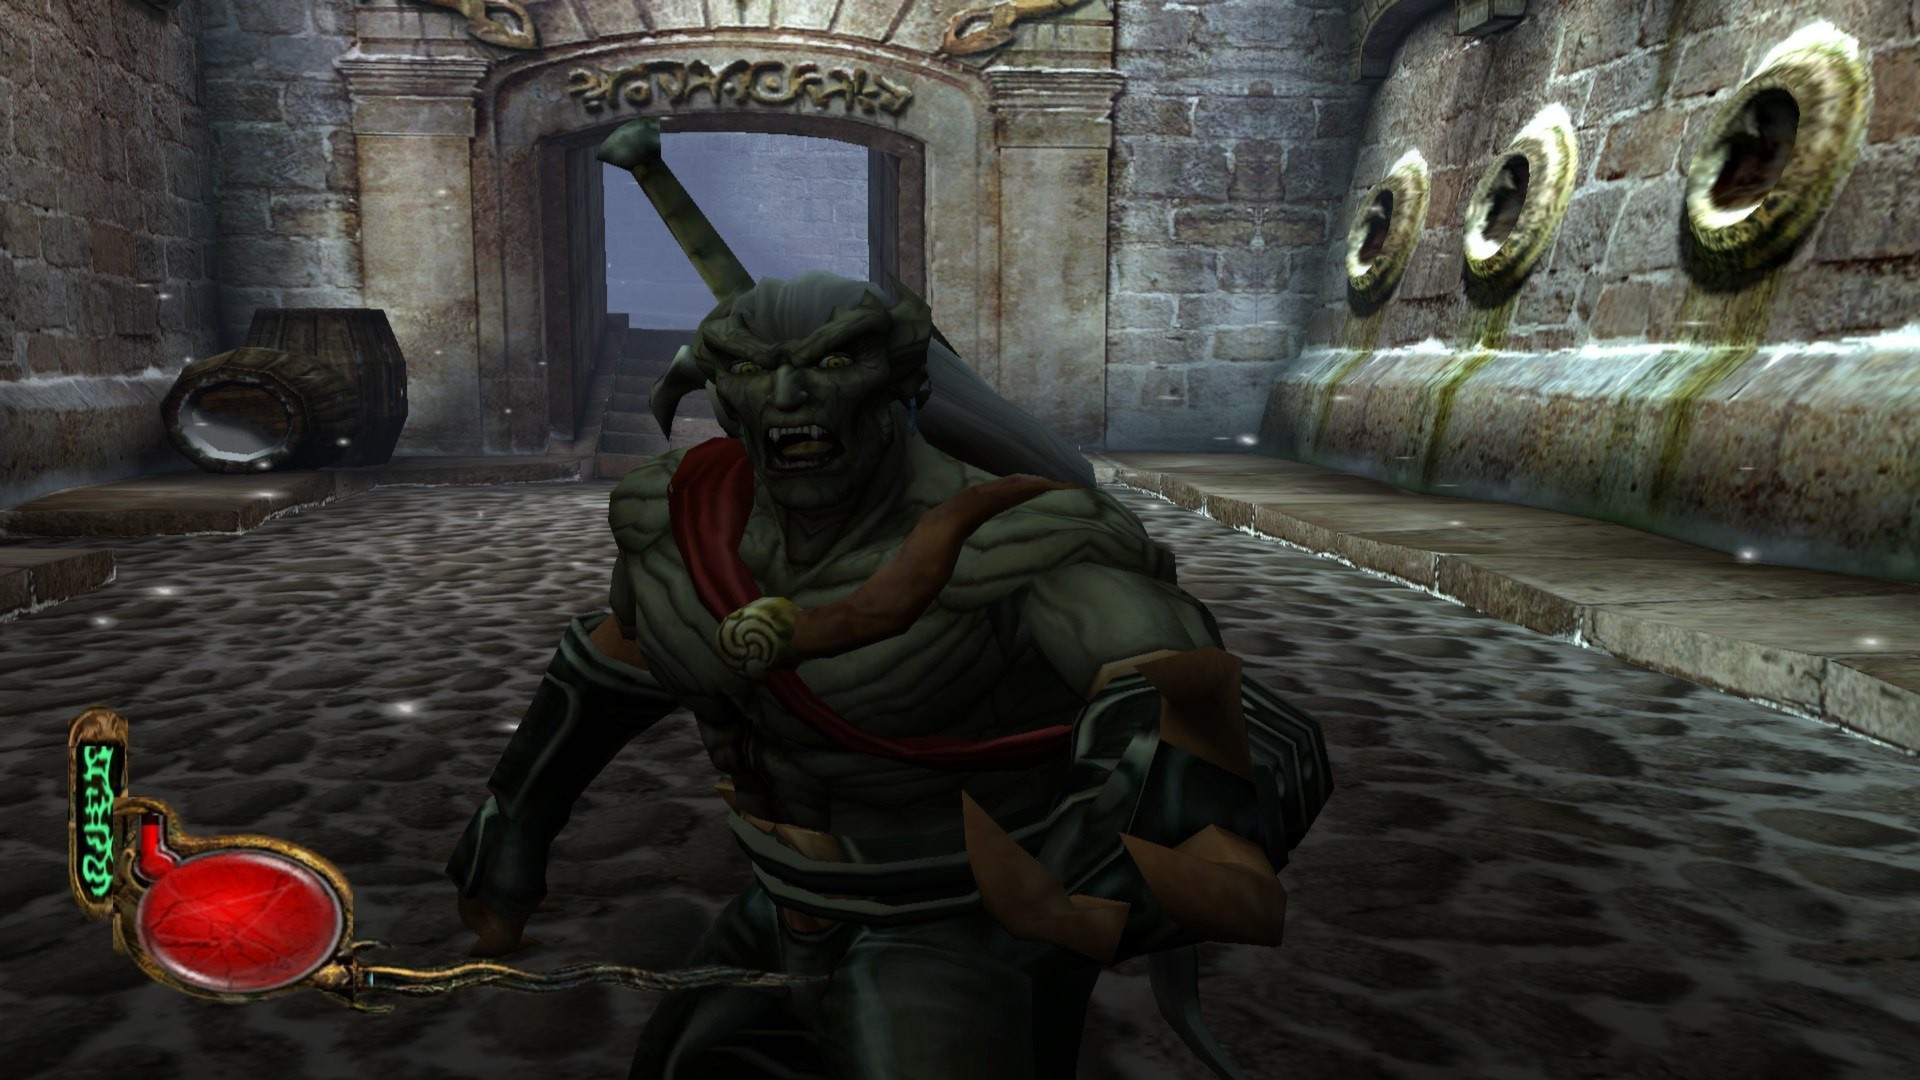 Steam legacy of kain defiance